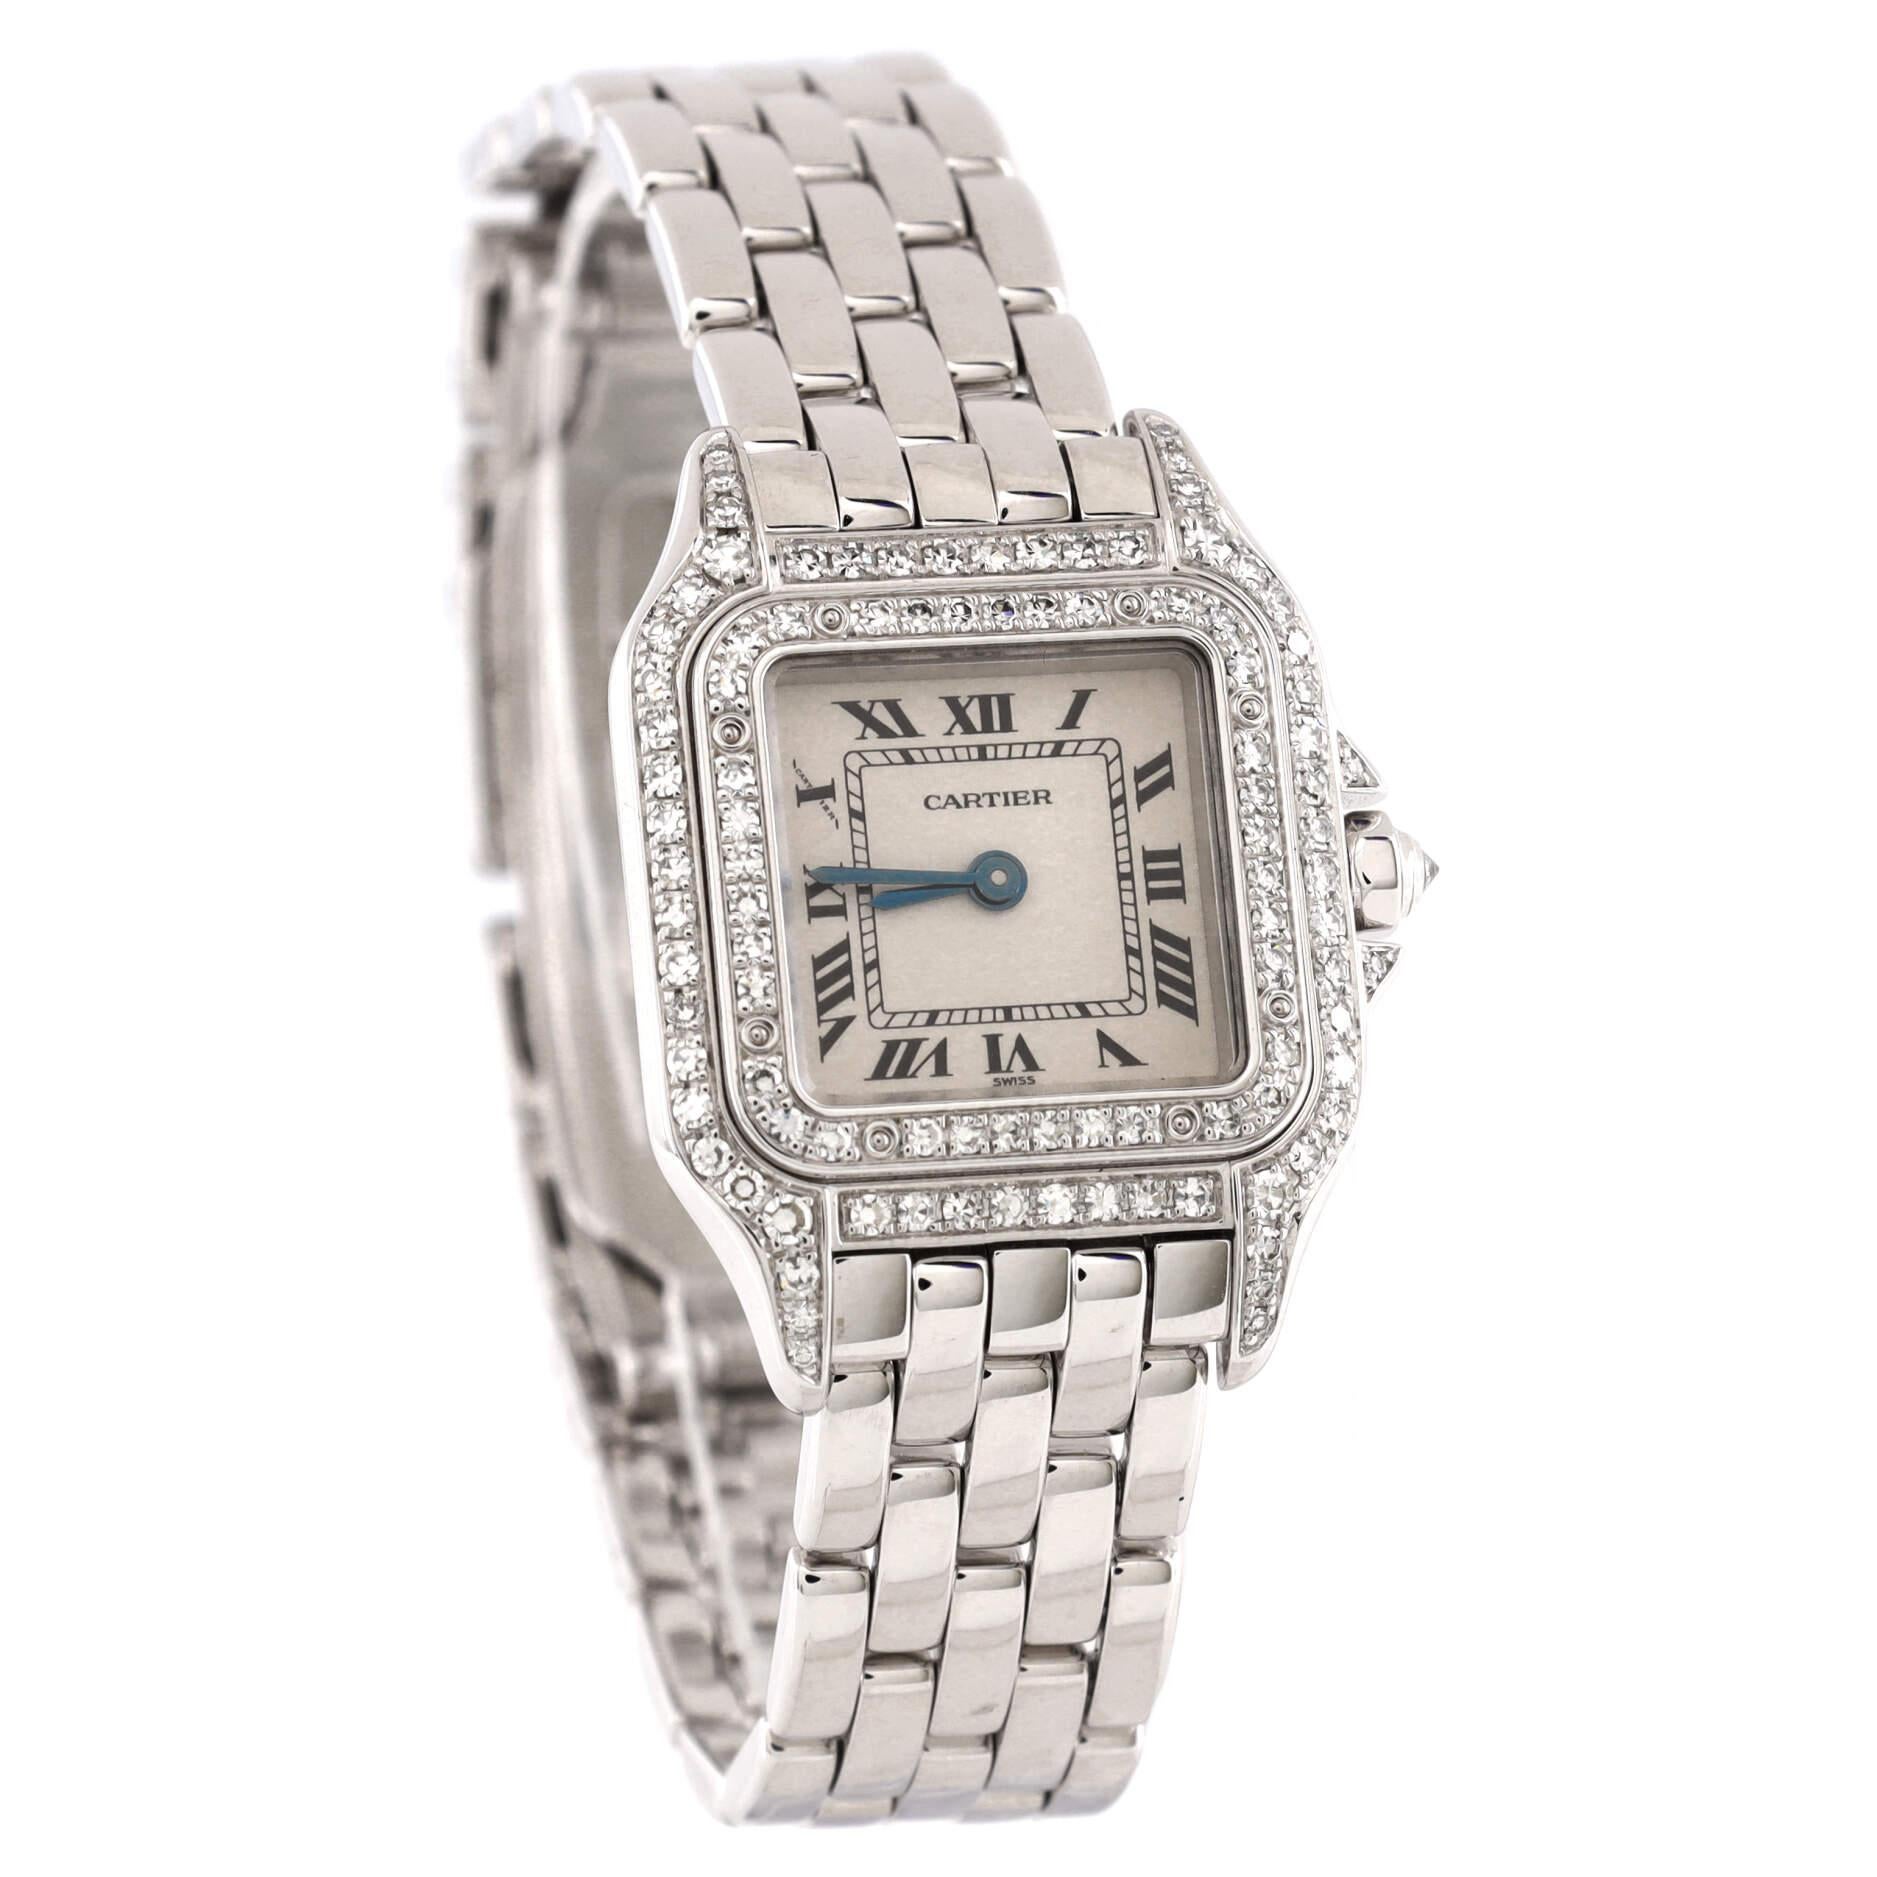 Condition: Excellent. Minor wear throughout case and bracelet.
Accessories: Service Pouch
Measurements: Case Size/Width: 22mm, Watch Height: 6mm, Band Width: 12mm, Wrist circumference: 5.5